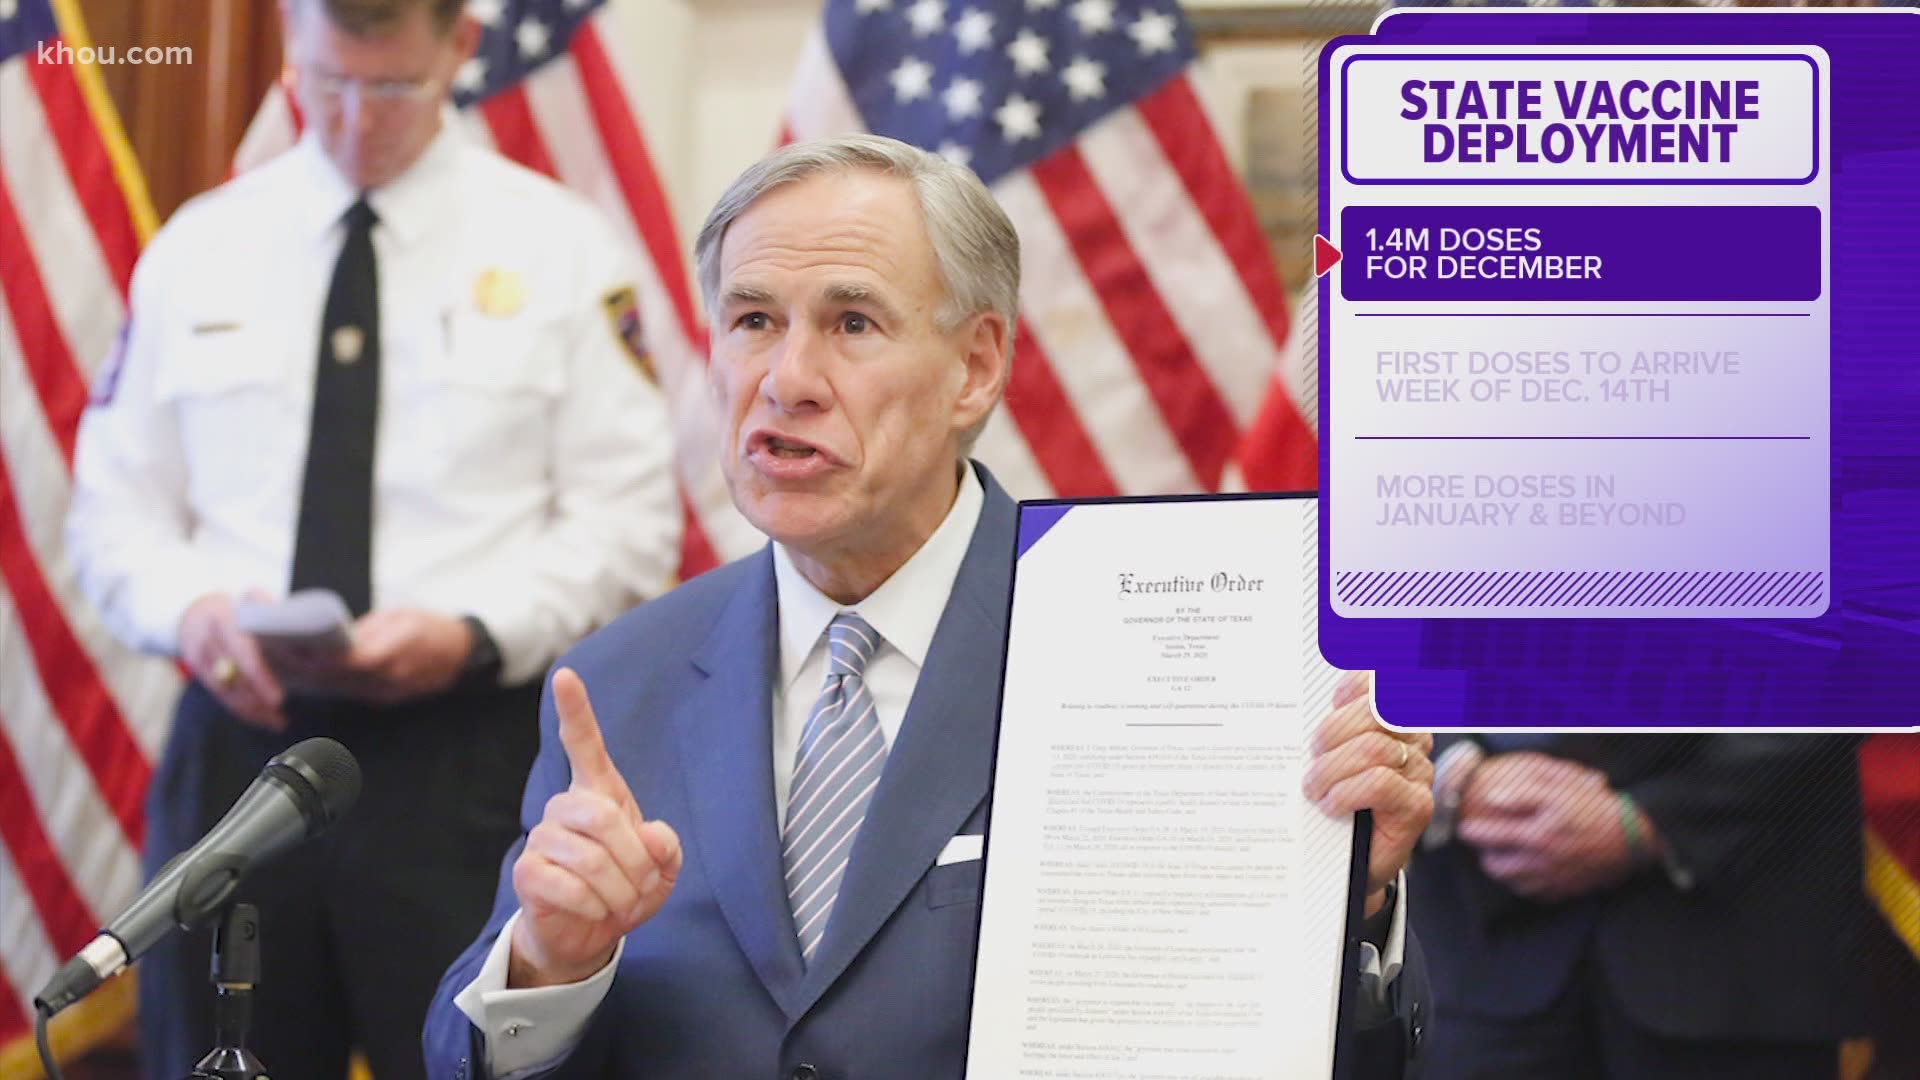 Texas is set to receive more than 1 million doses of the COVID-19 vaccine this month, Gov. Greg Abbott announced Wednesday.